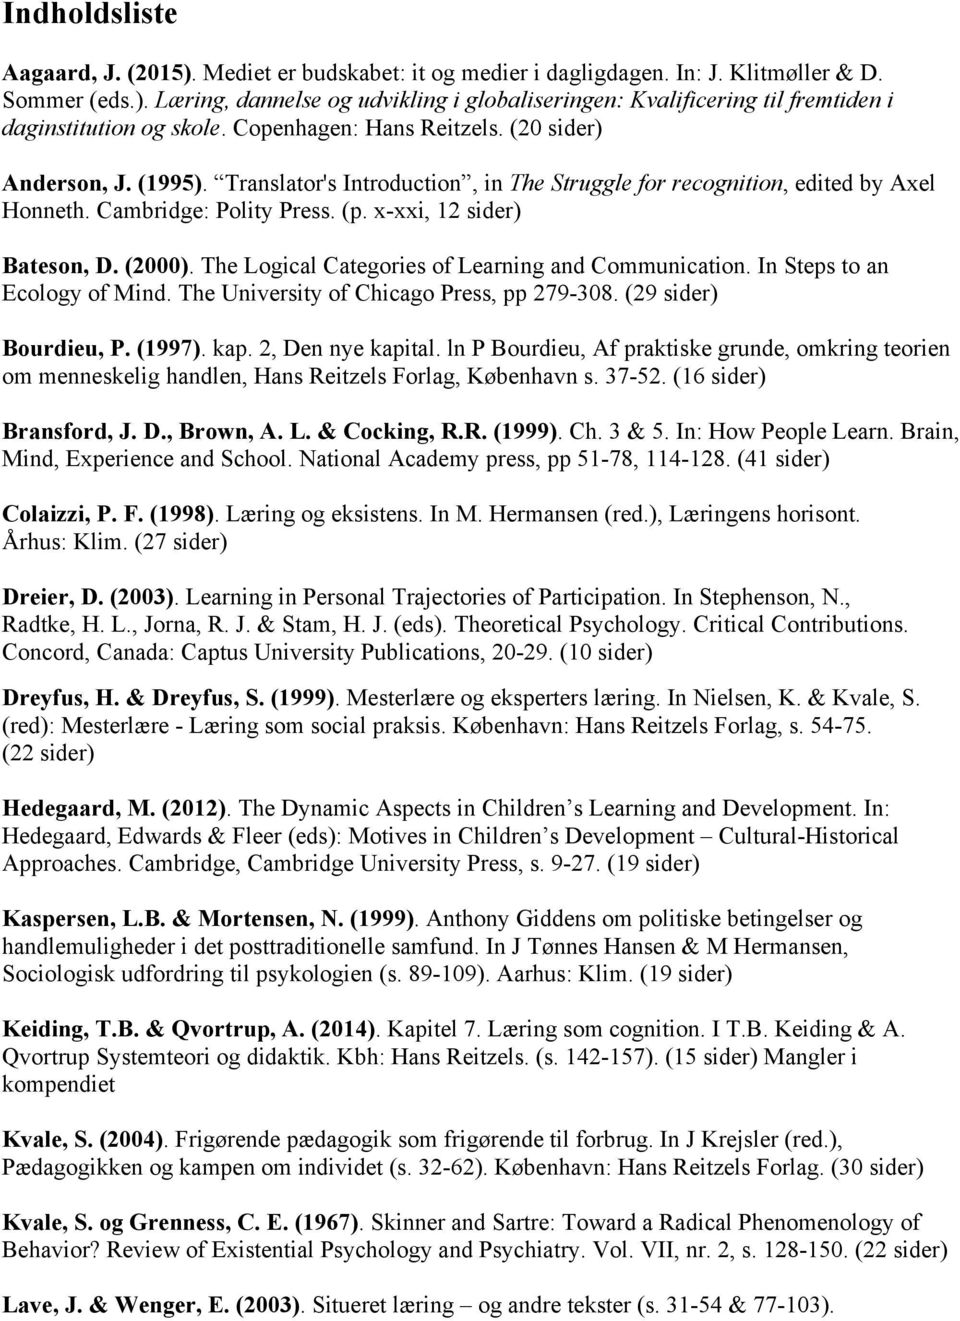 (2000). The Logical Categories of Learning and Communication. In Steps to an Ecology of Mind. The University of Chicago Press, pp 279-308. (29 sider) Bourdieu, P. (1997). kap. 2, Den nye kapital.